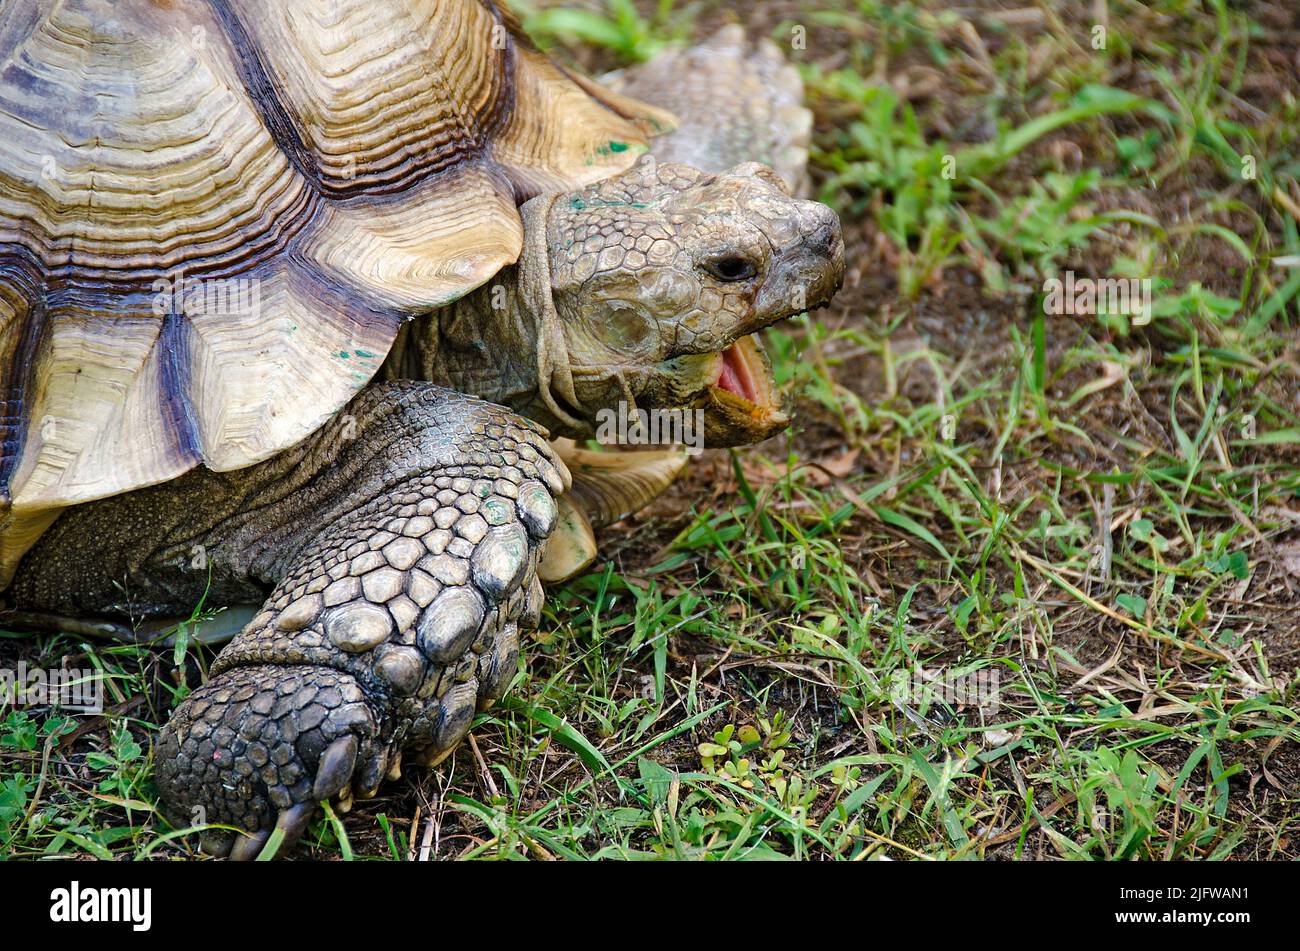 Close up of old tortoise with open mouth on dirt and grass Stock Photo